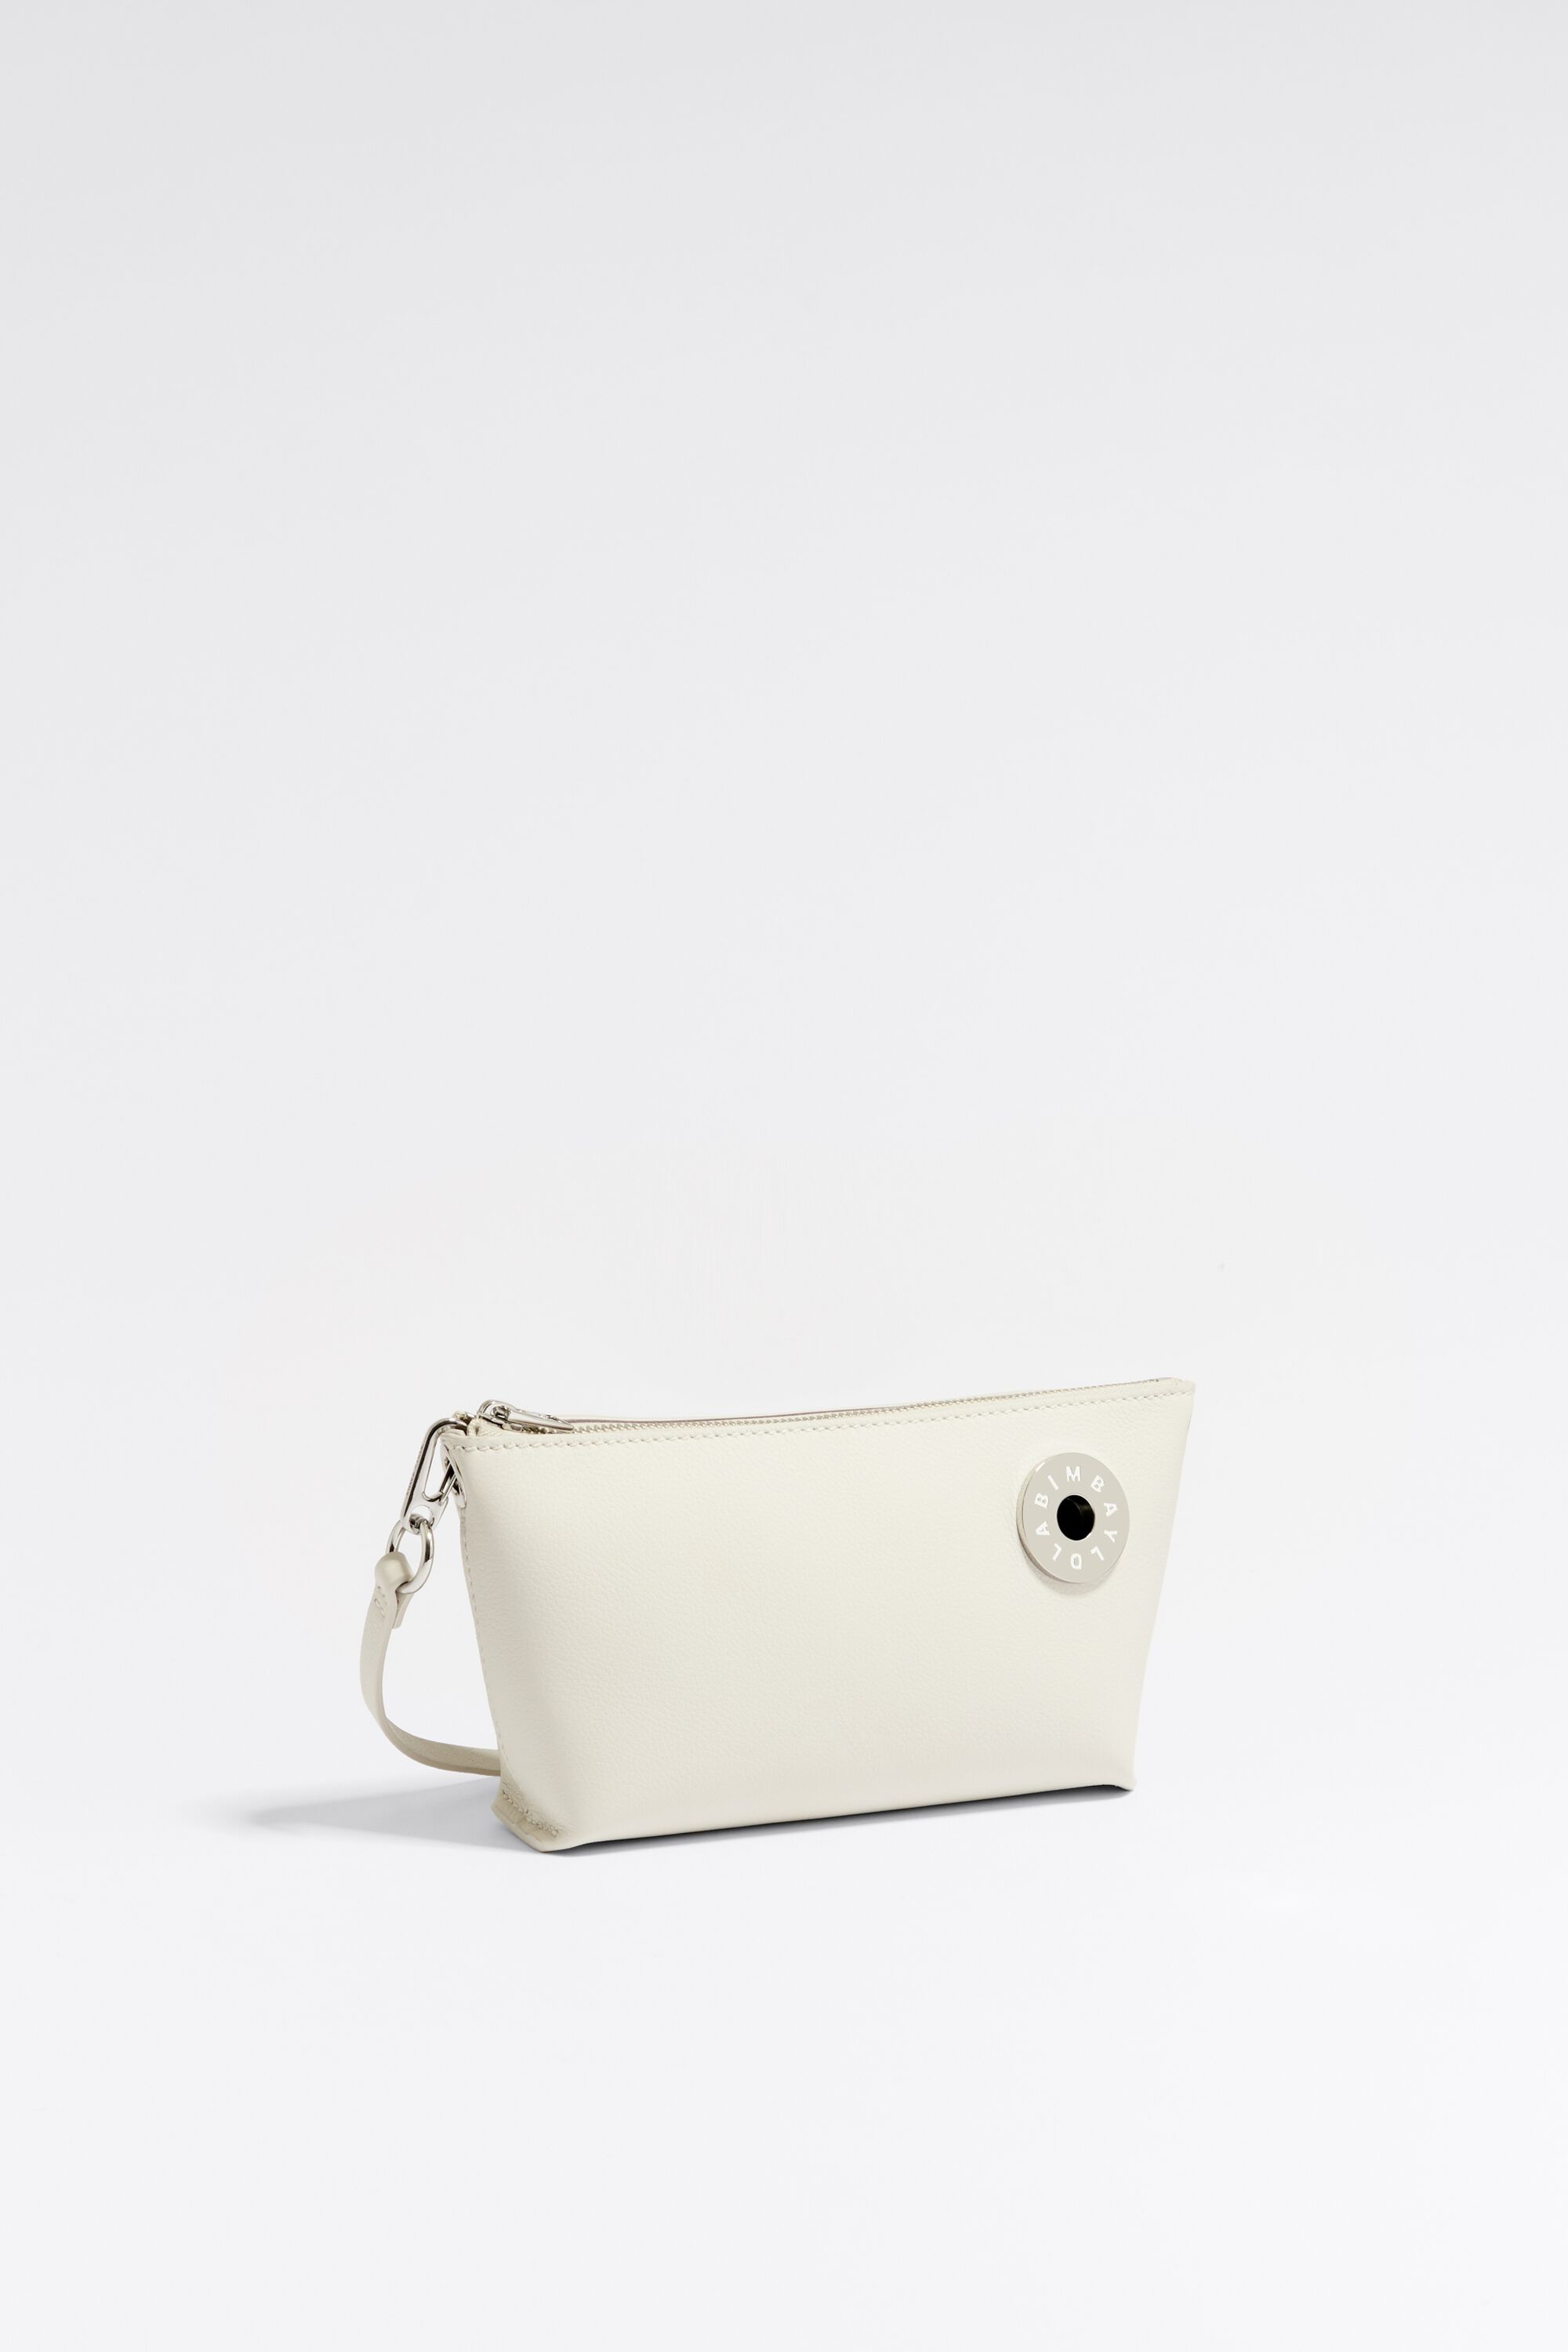 XS off-white leather crossbody bag